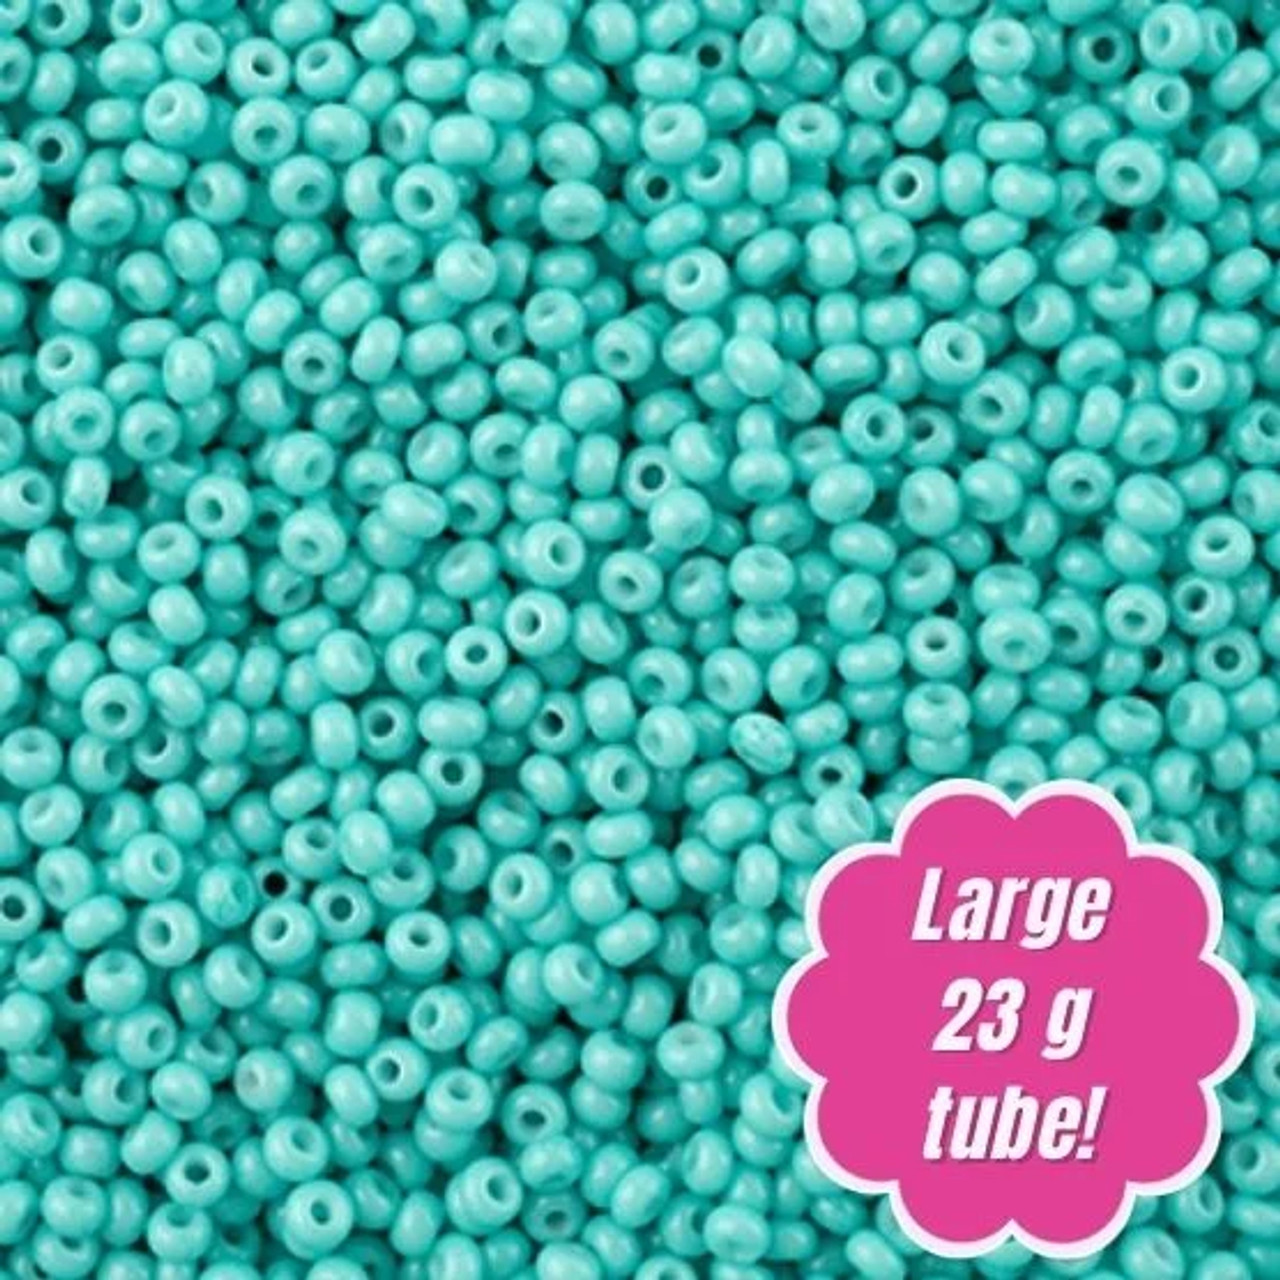 Czech Glass Seed Beads Size 8/0 Teal Rocailles